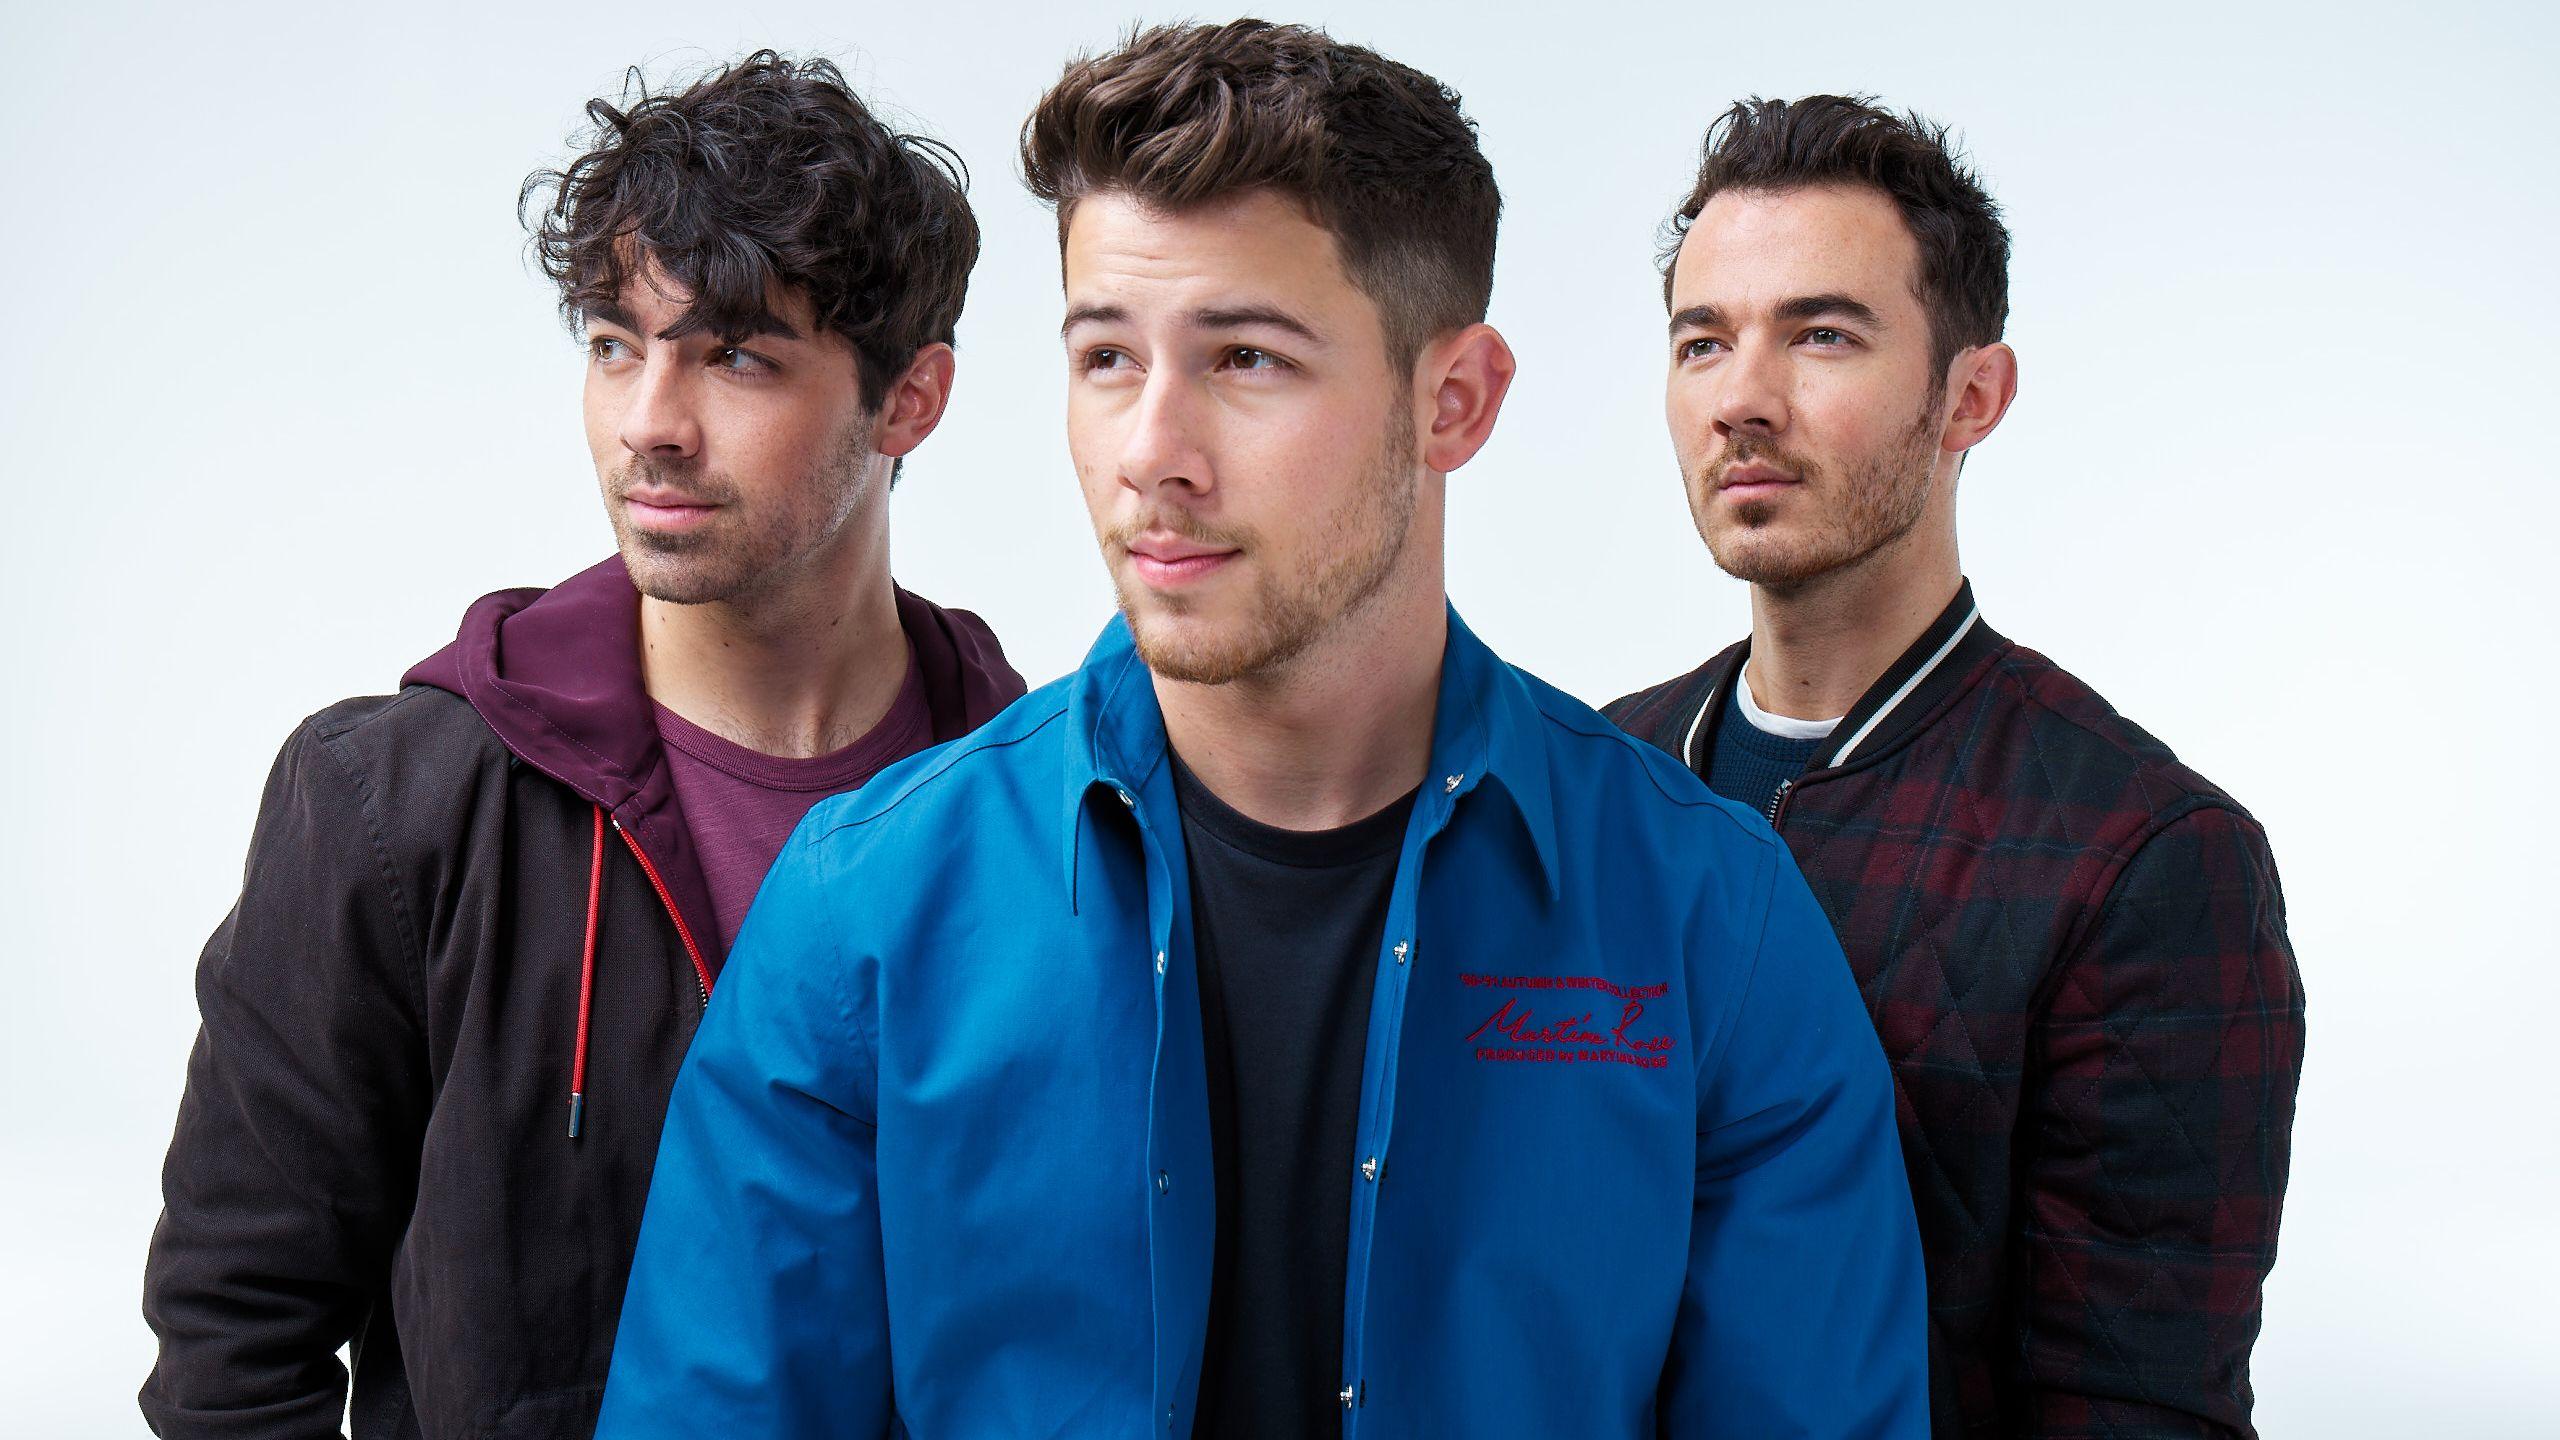 16575 Jonas Brothers Announce New 40 City Tour With Dallas Date   Android  iPhone HD Wallpaper Background Download HD Wallpapers Desktop  Background  Android  iPhone 1080p 4k 1080x810 2023